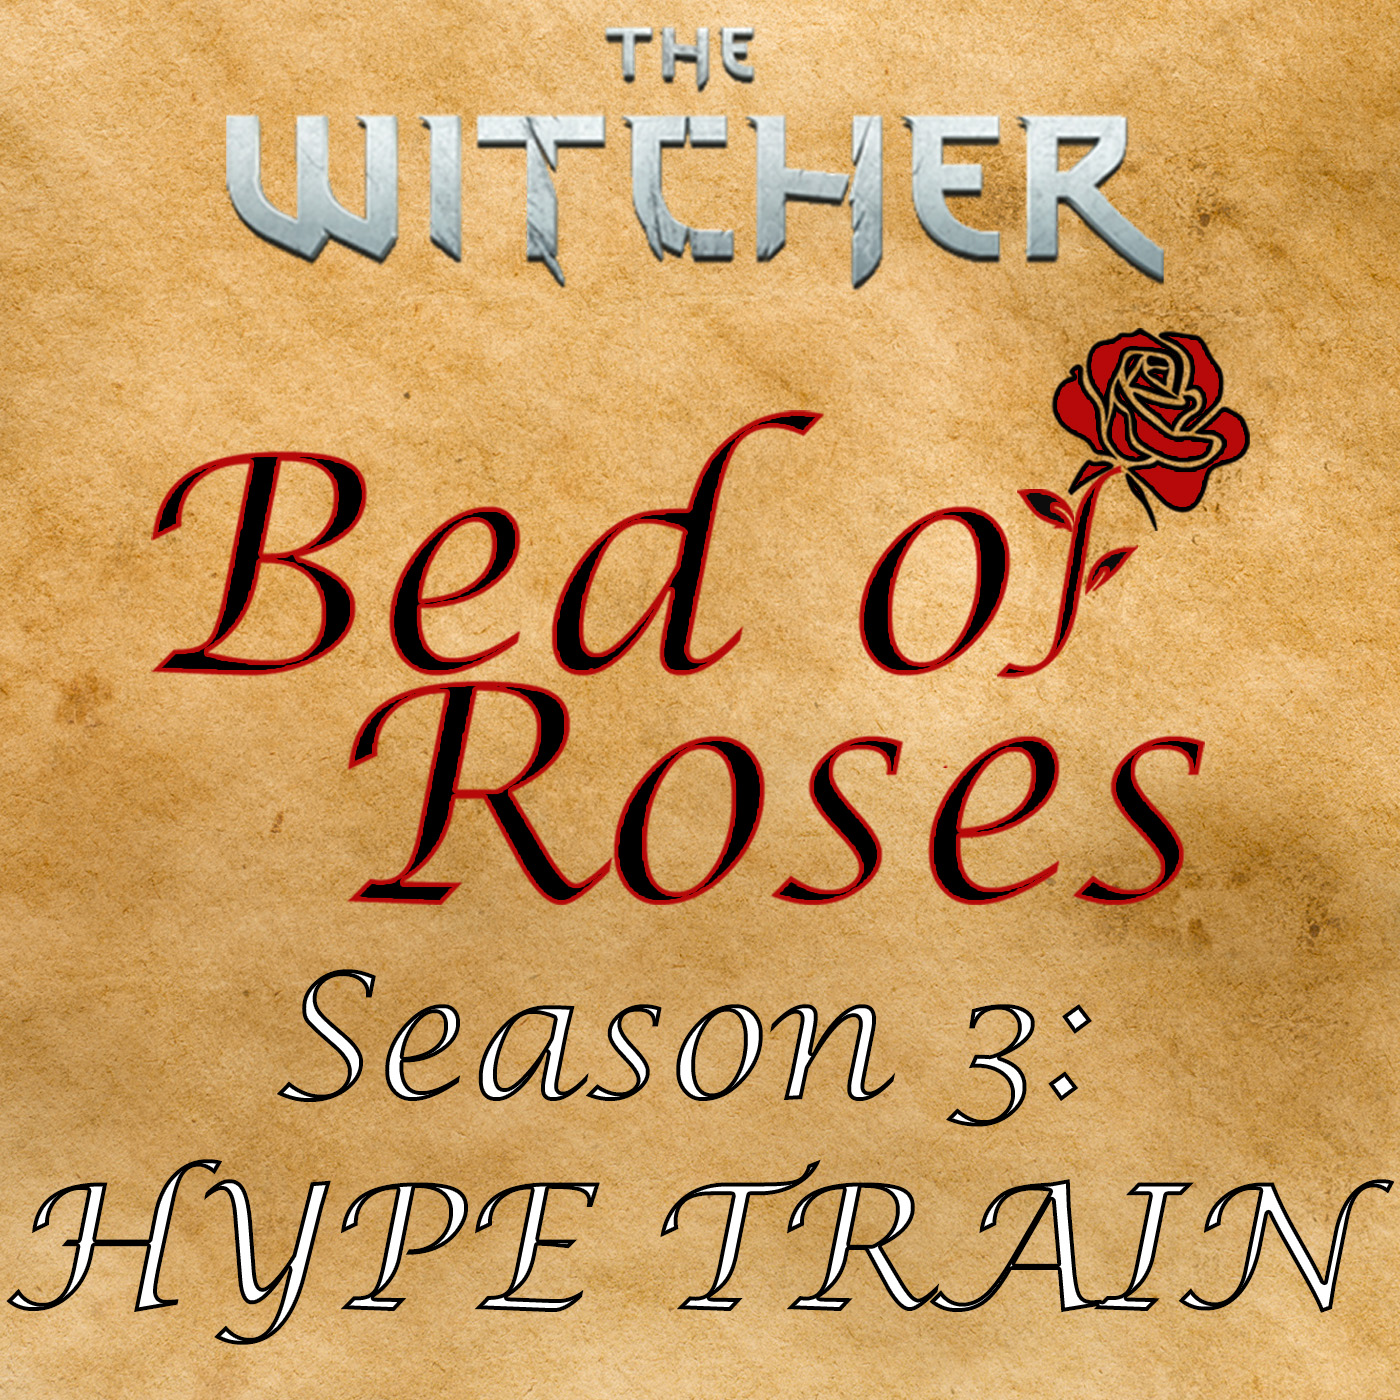 The Witcher: Bed of Roses Season 2 HYPE TRAIN